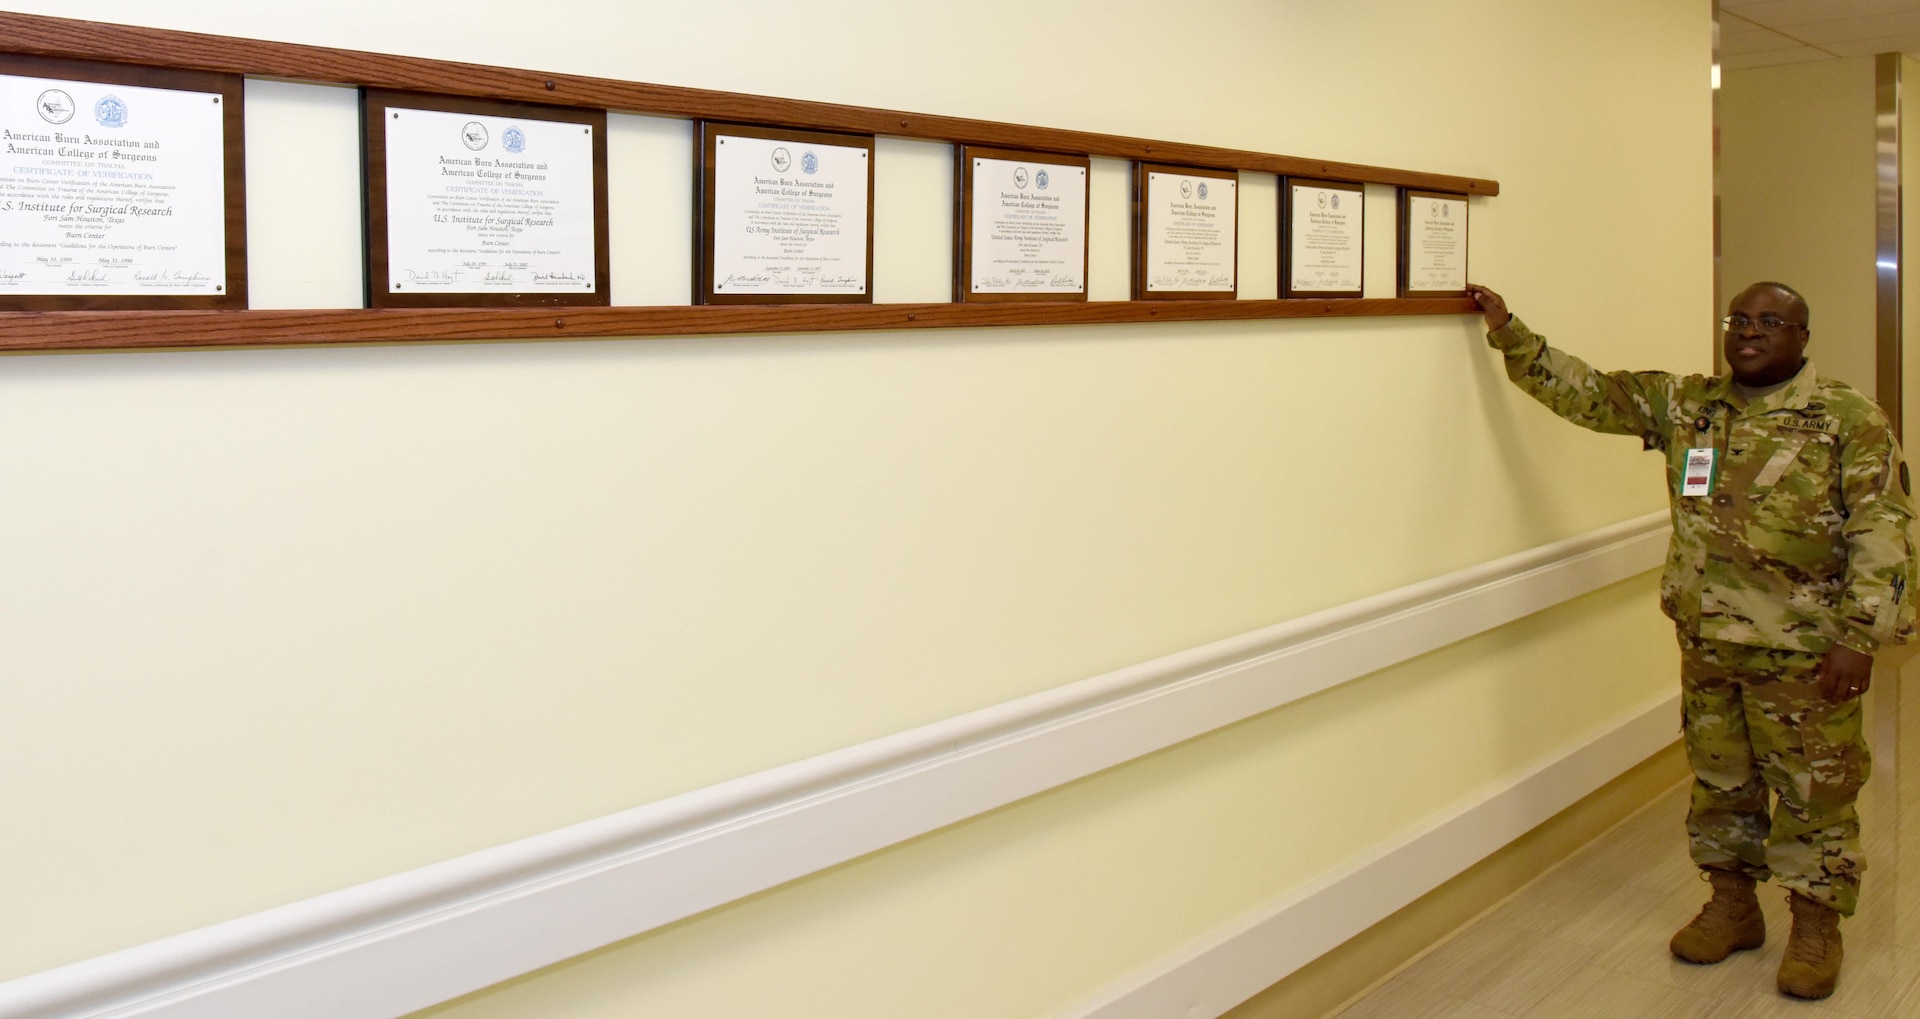 Col. (Dr.) Booker King places the latest American Burn Association and the American College of Surgeons reverification certificate next to previous certificates at the U.S. Army Institute of Surgical Research Burn Center.